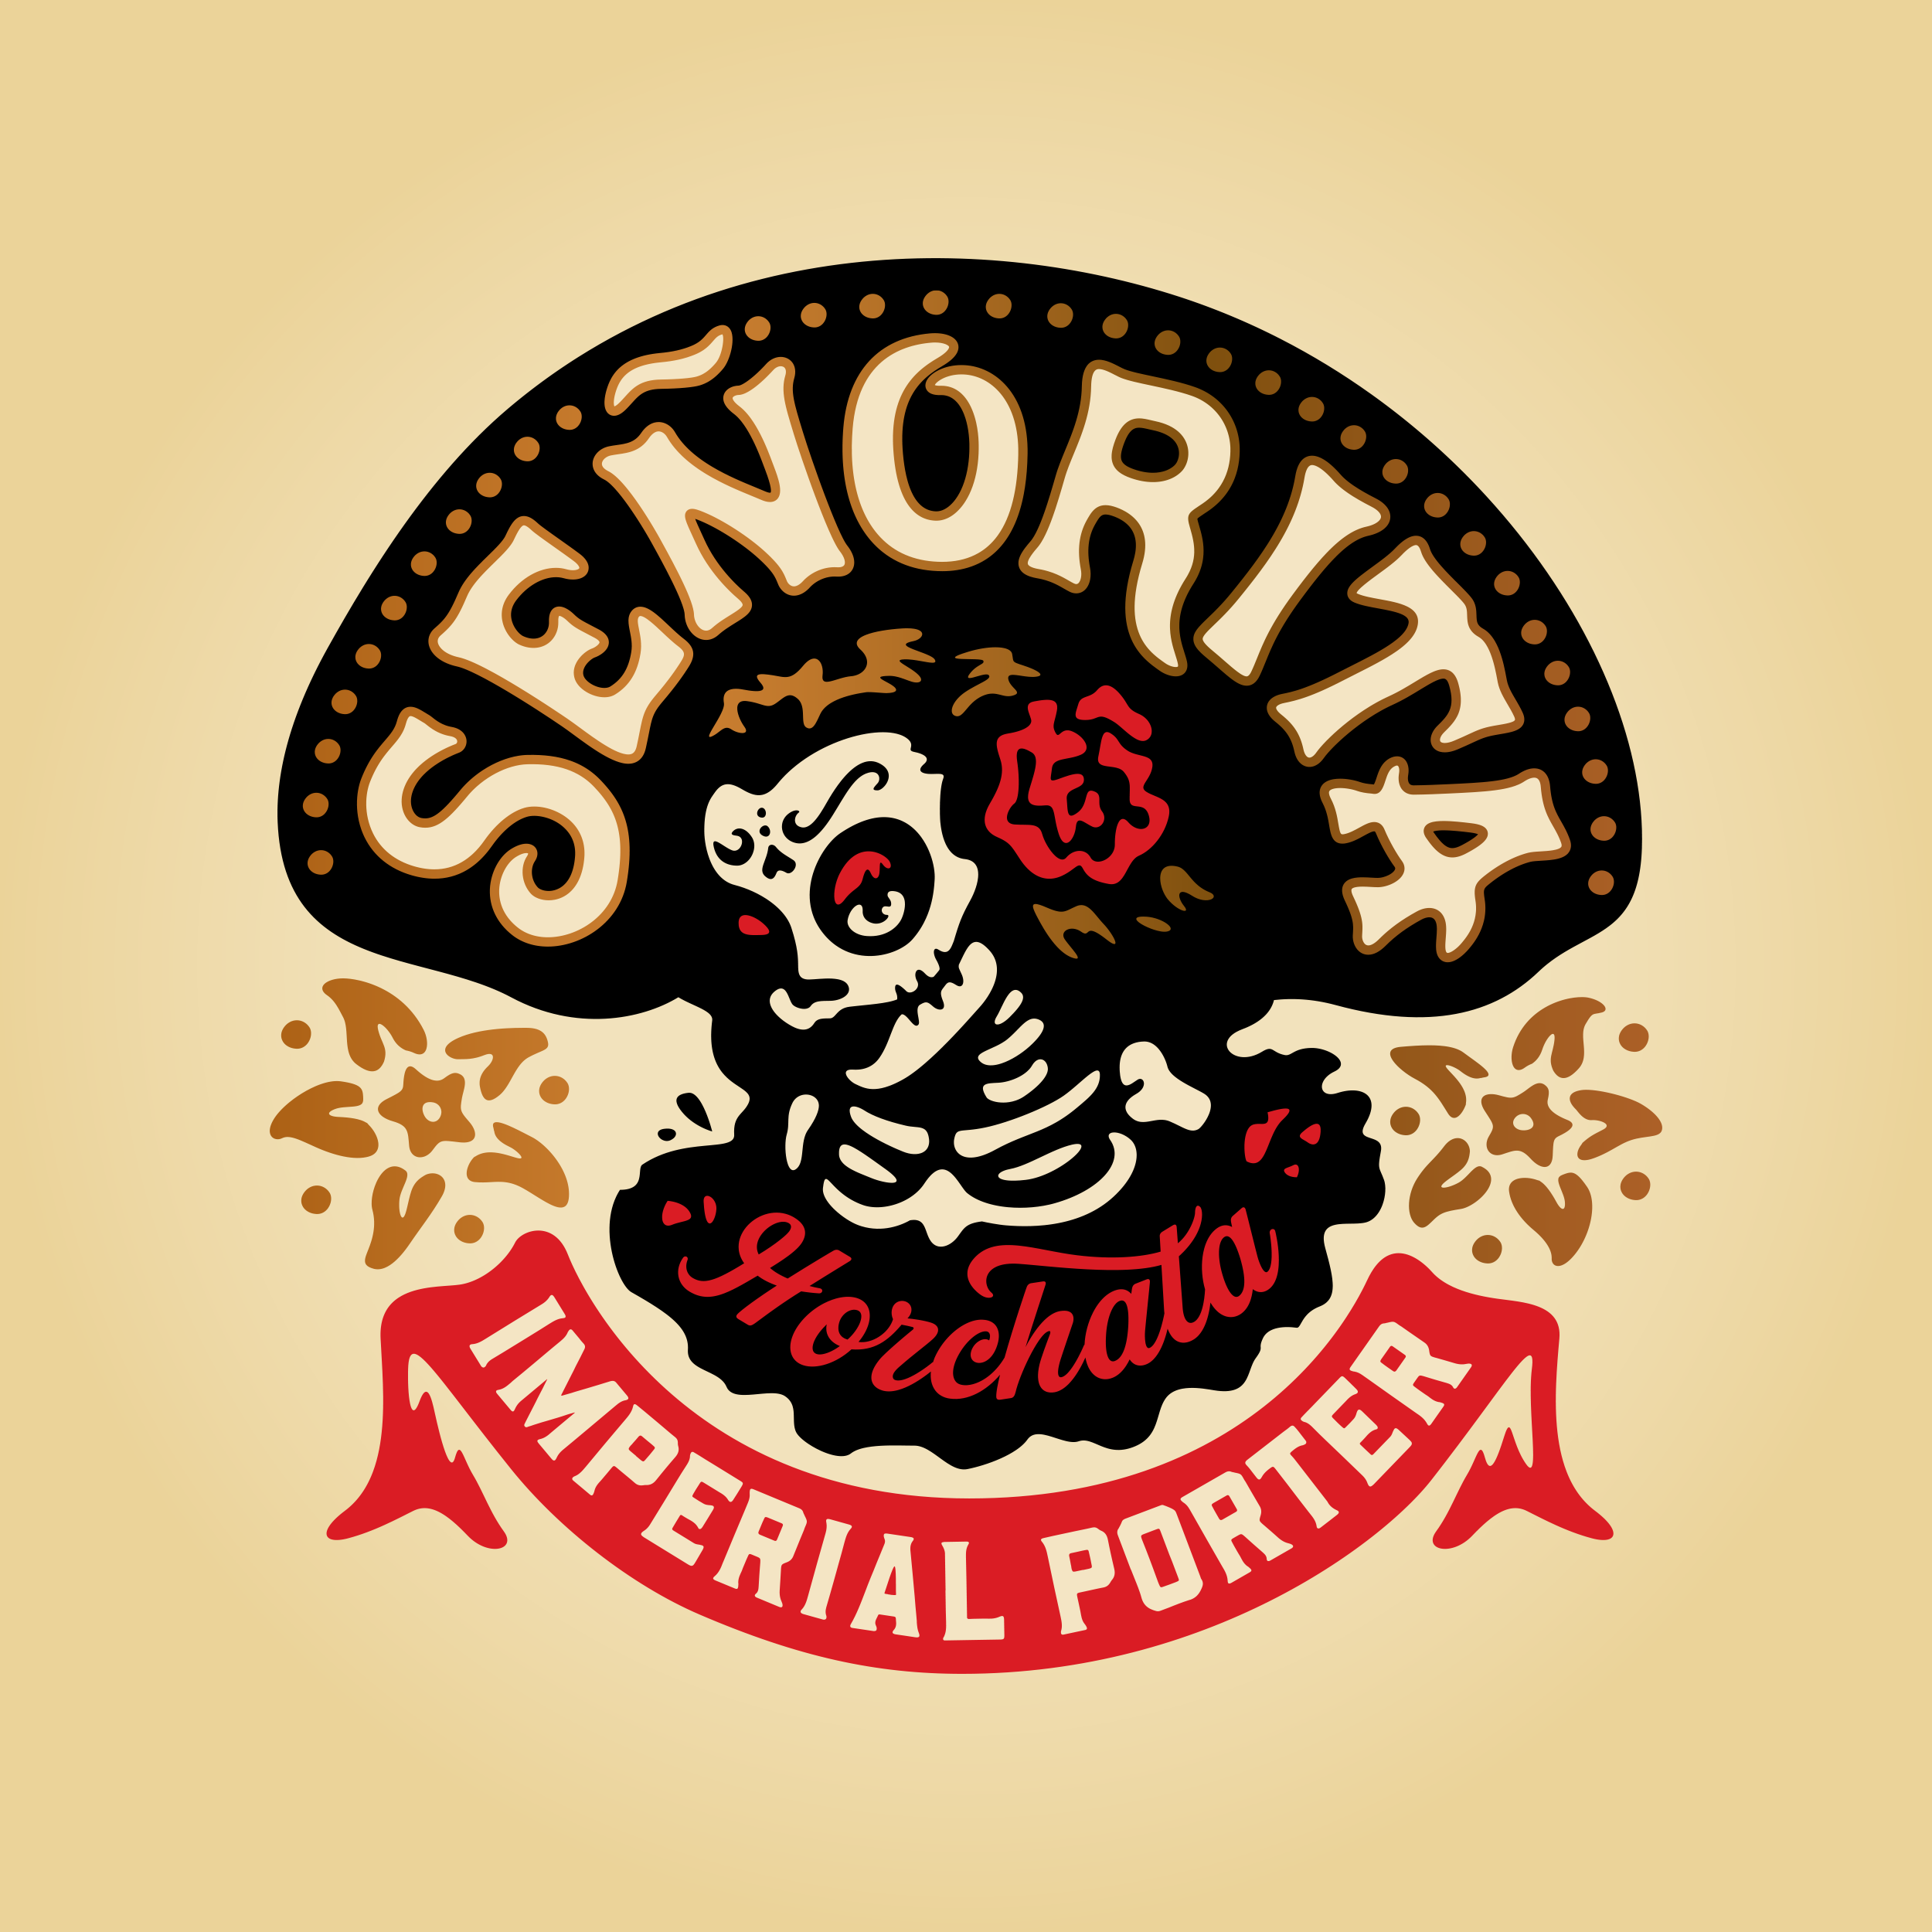 Elevation Beer Co - Señorita Imperial Porter Logo Graphic by Sunday Lounge